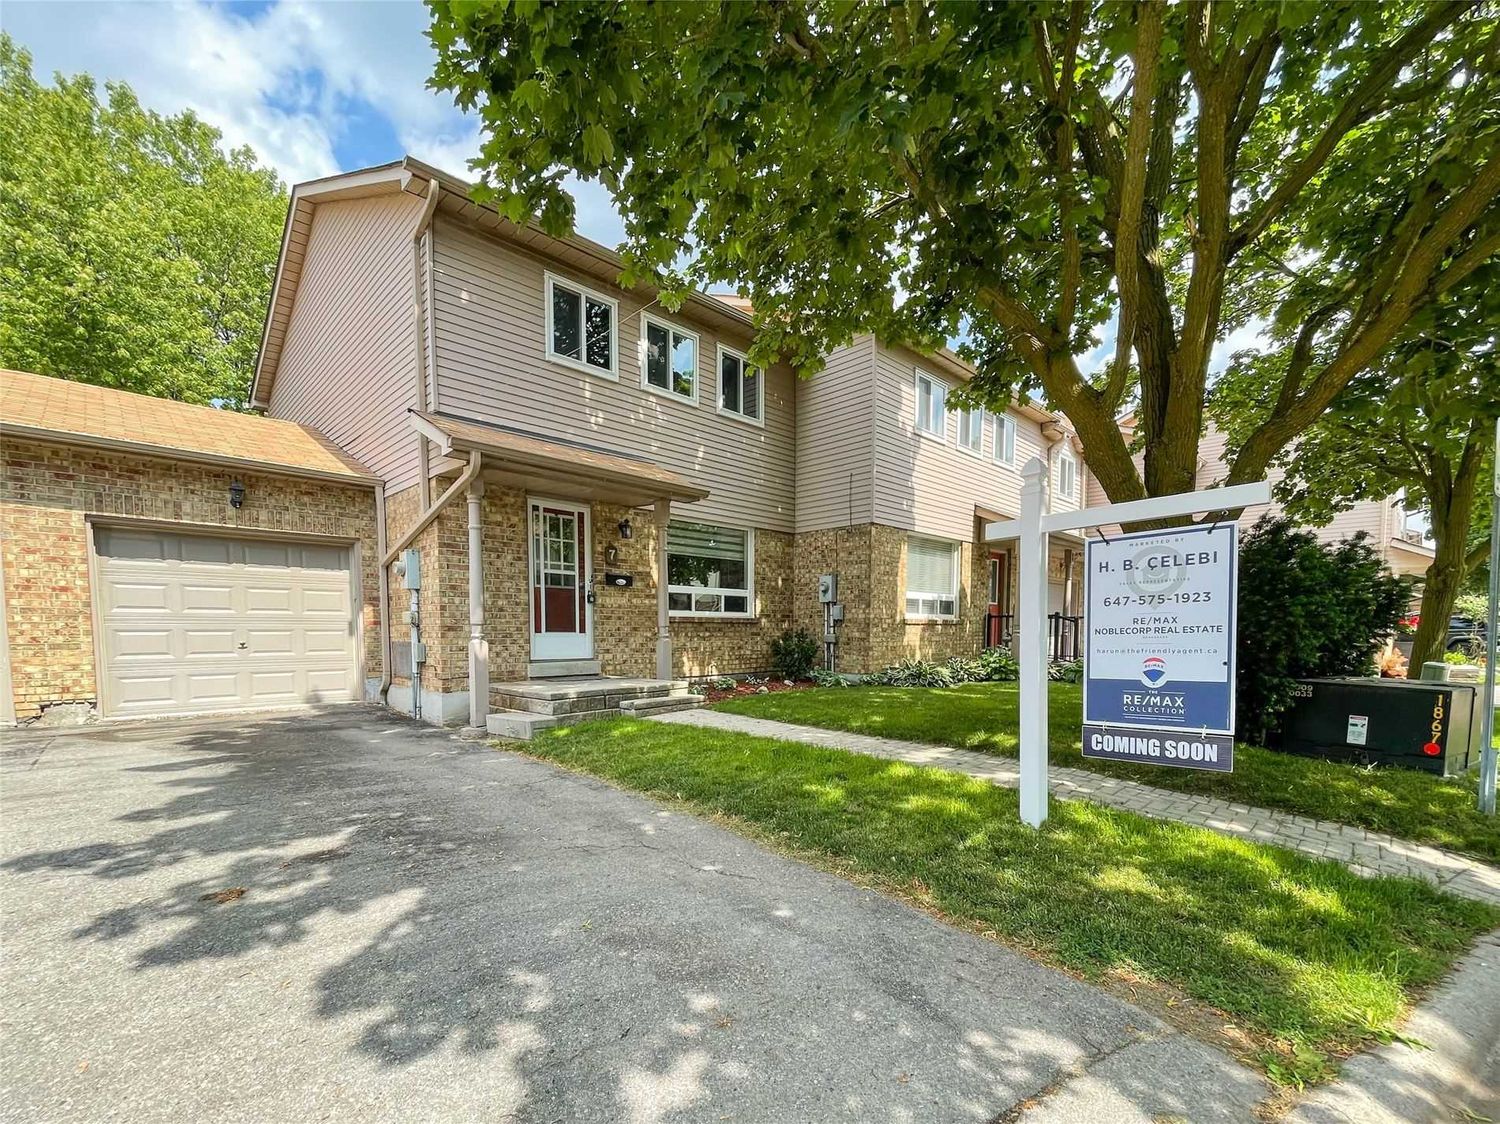 1640 Nichol Avenue. 1640 Nichol Ave Townhomes is located in  Whitby, Toronto - image #2 of 2